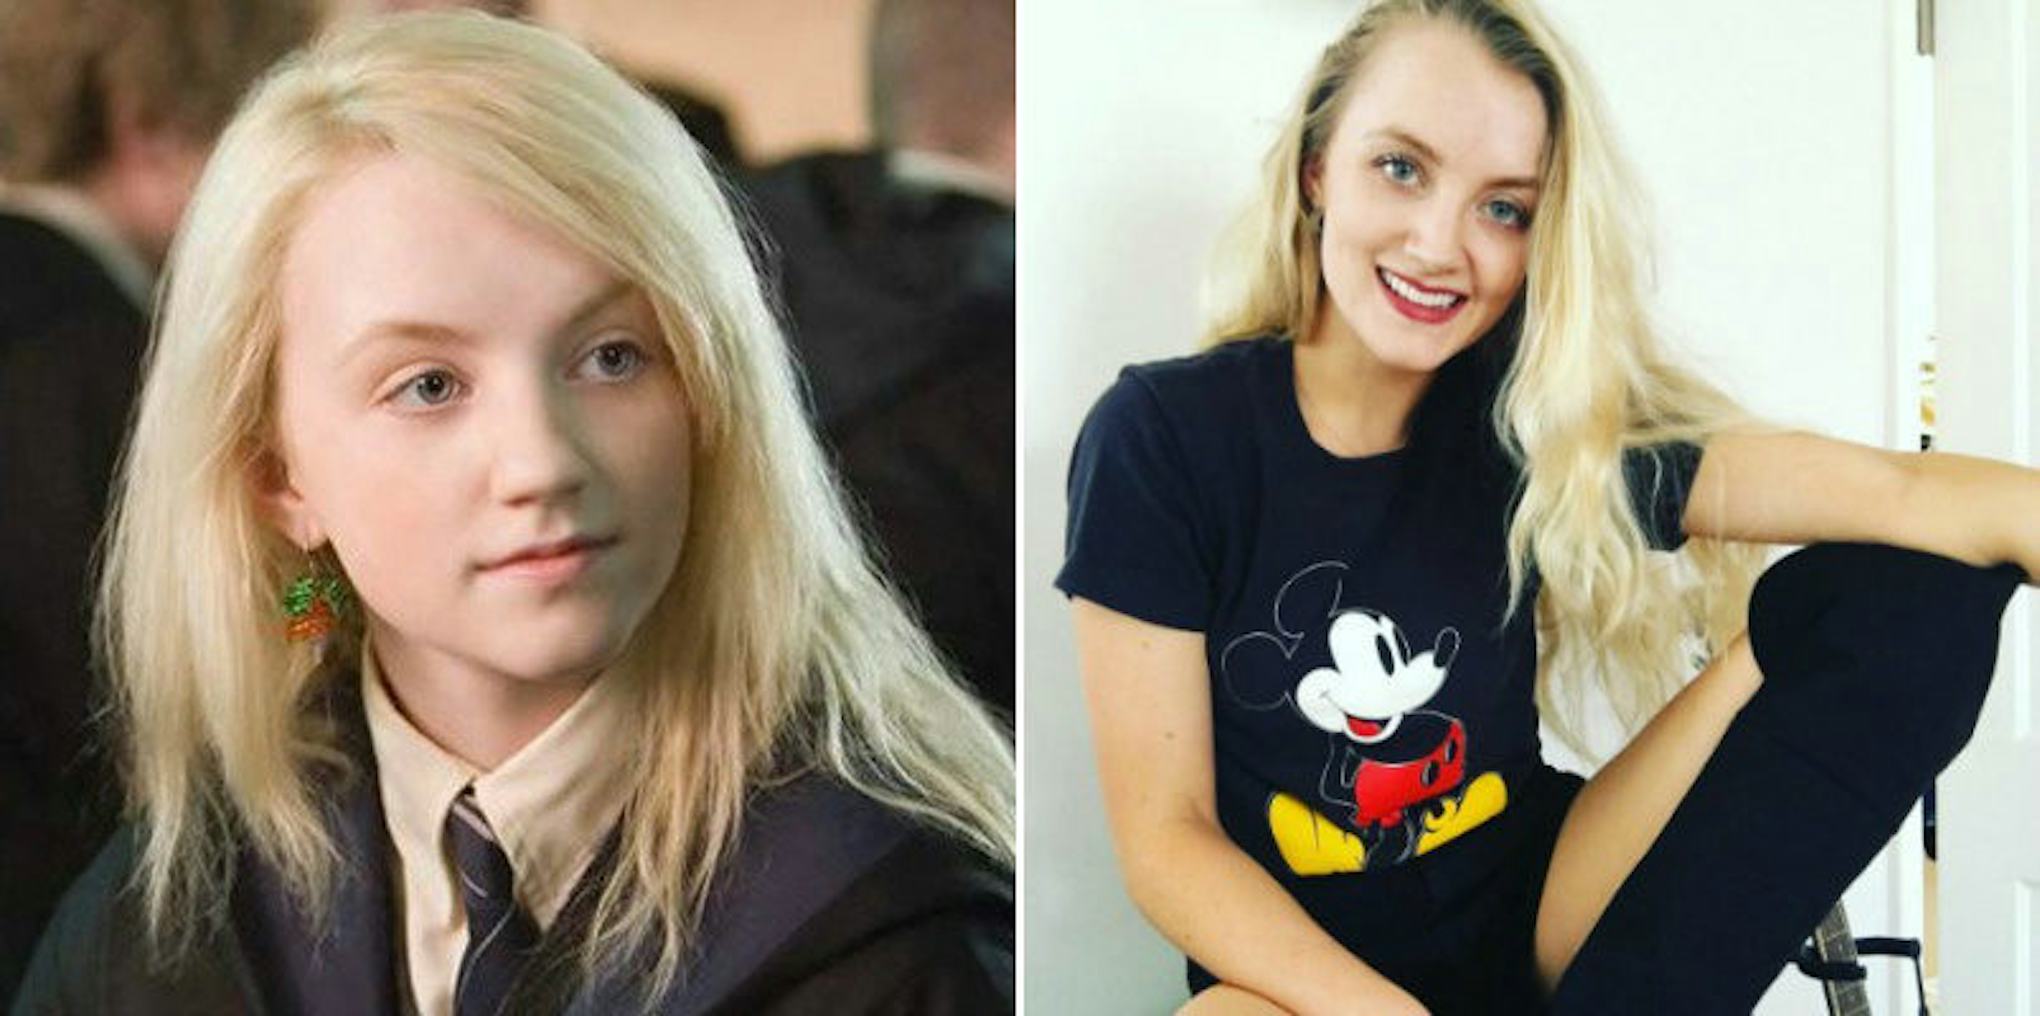 Luna Lovegood From Harry Potter Is All Grown Up And Insanely Hot